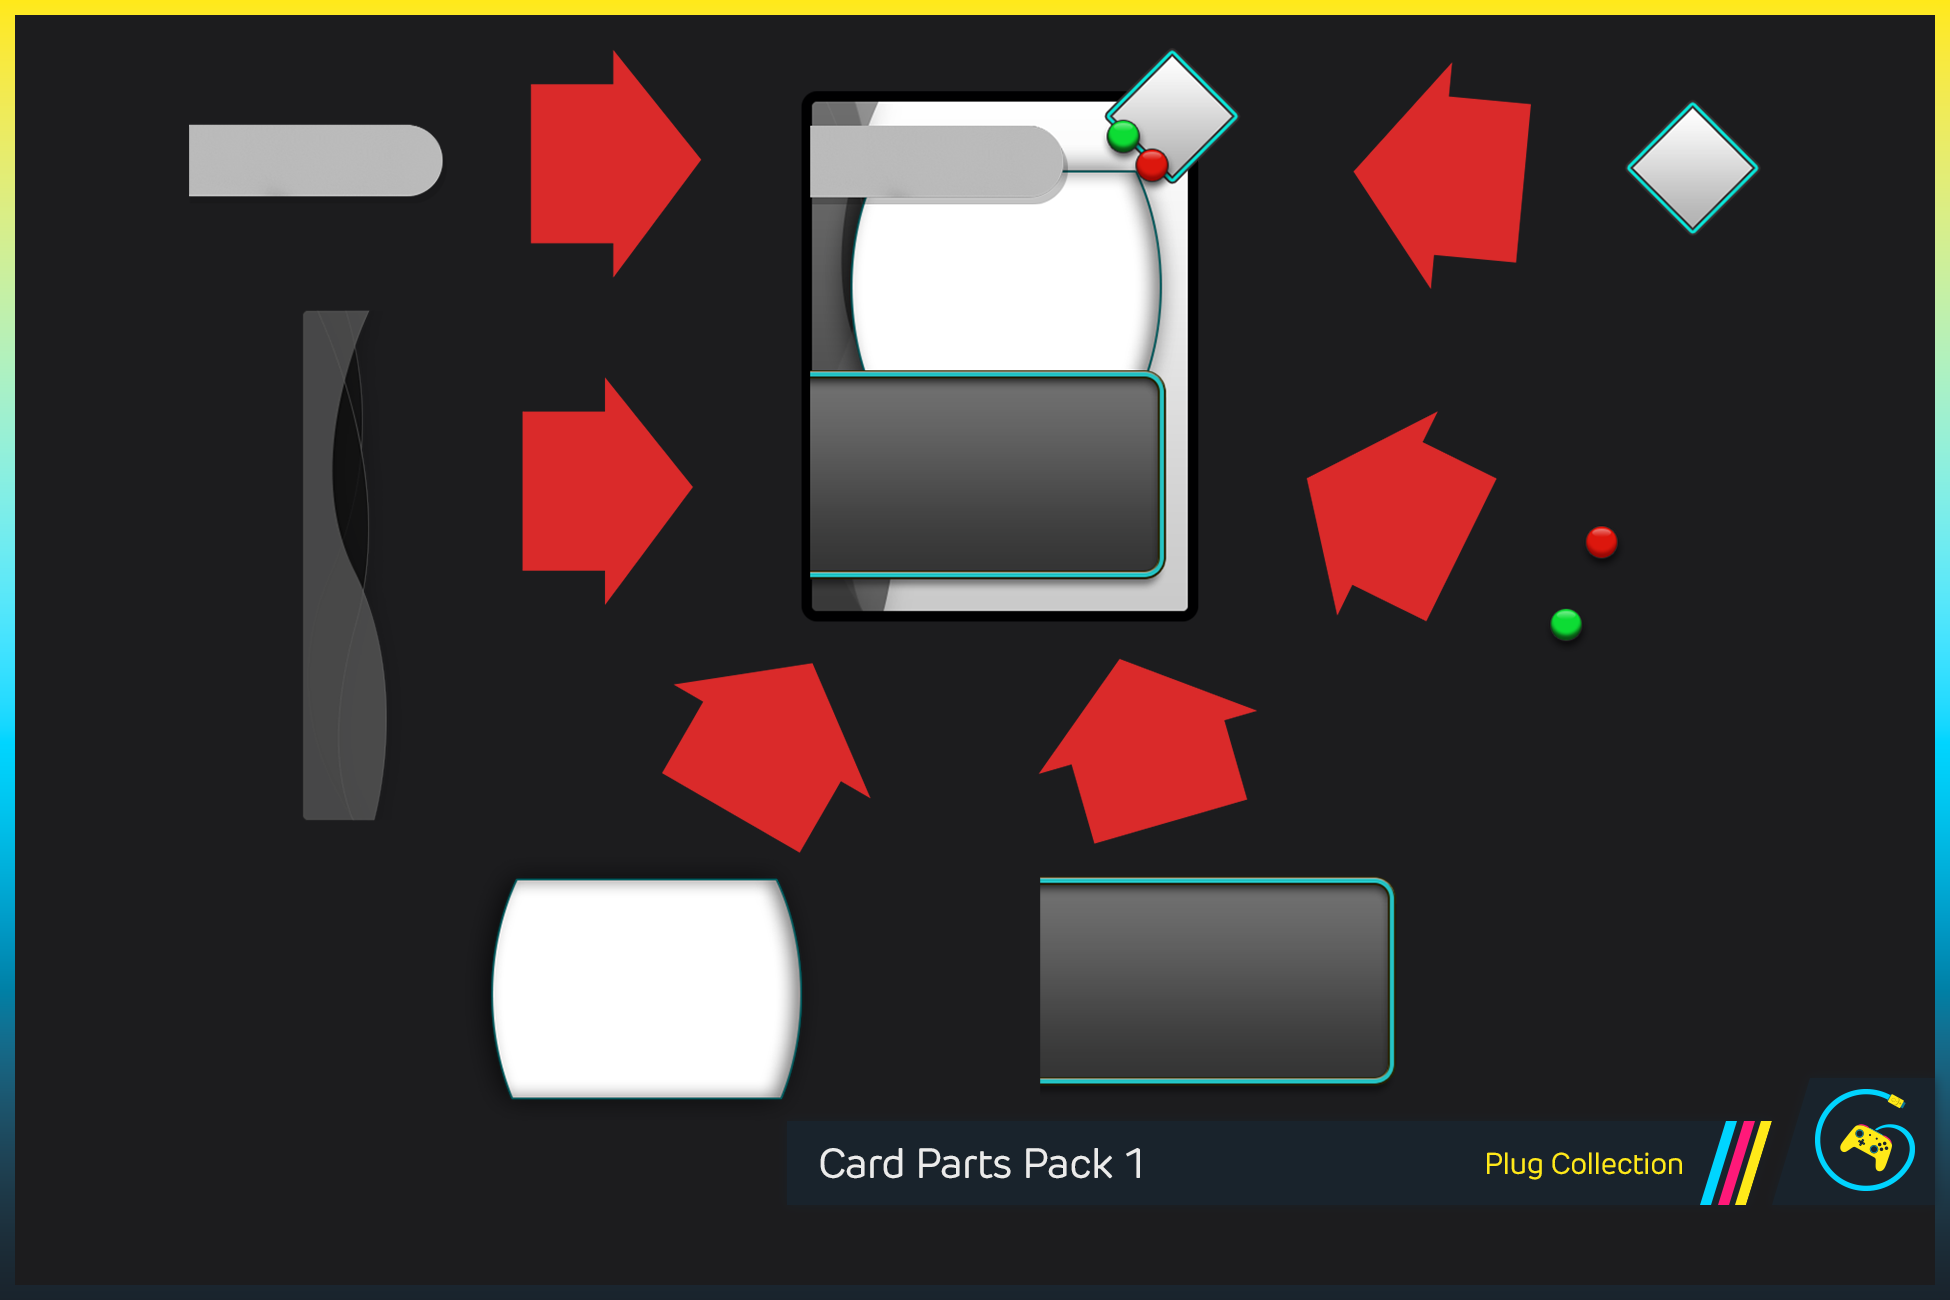 Card Parts Pack 1